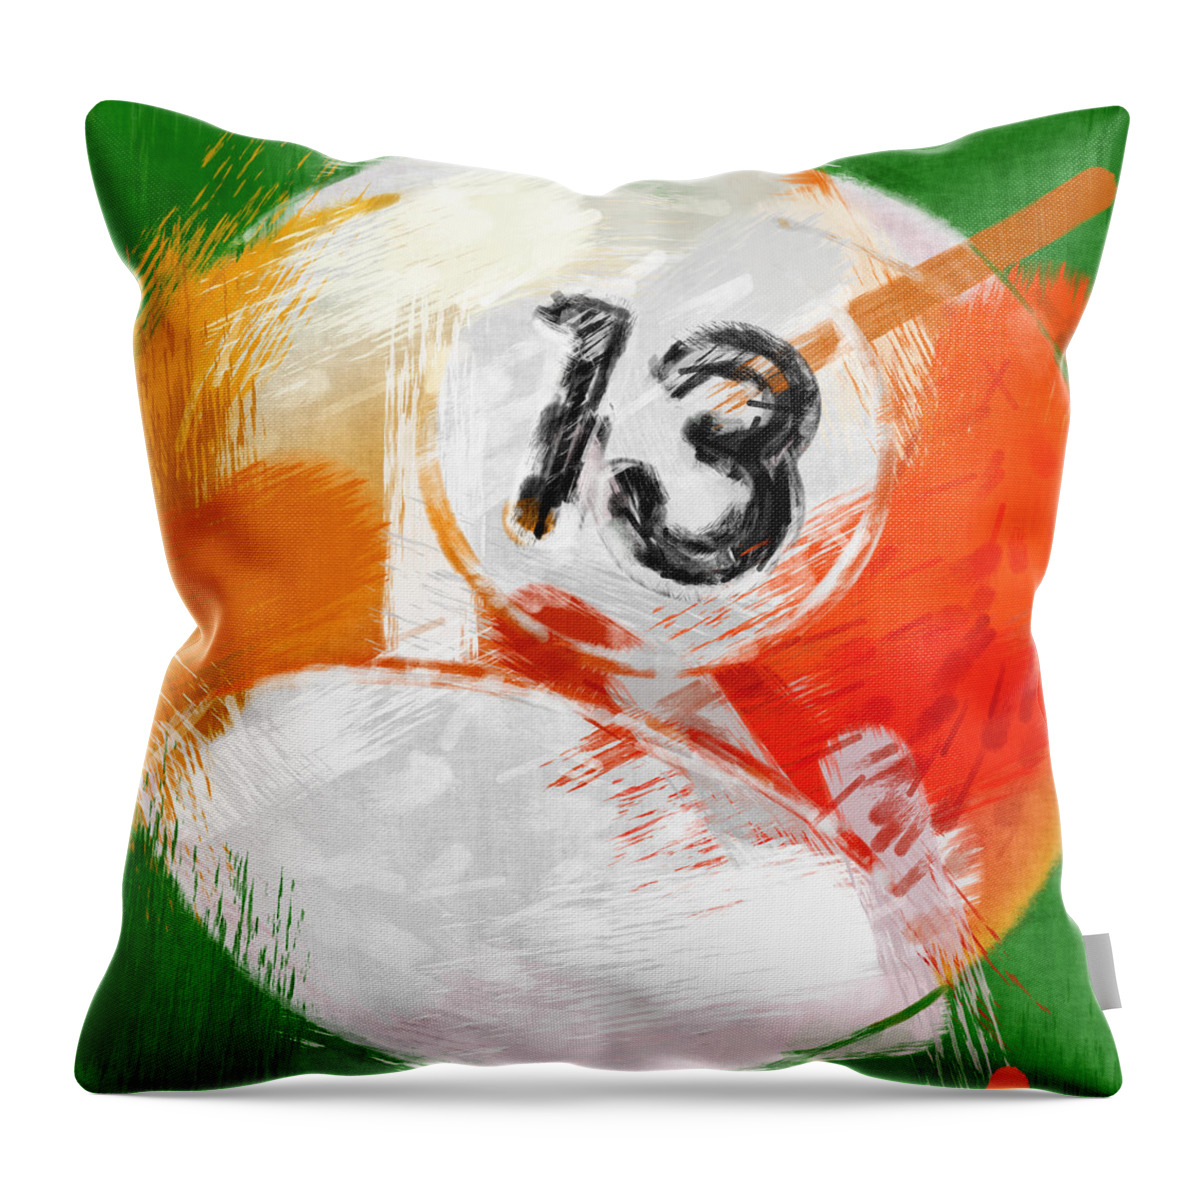 13 Throw Pillow featuring the photograph Number Thirteen Billiards Ball Abstract by David G Paul